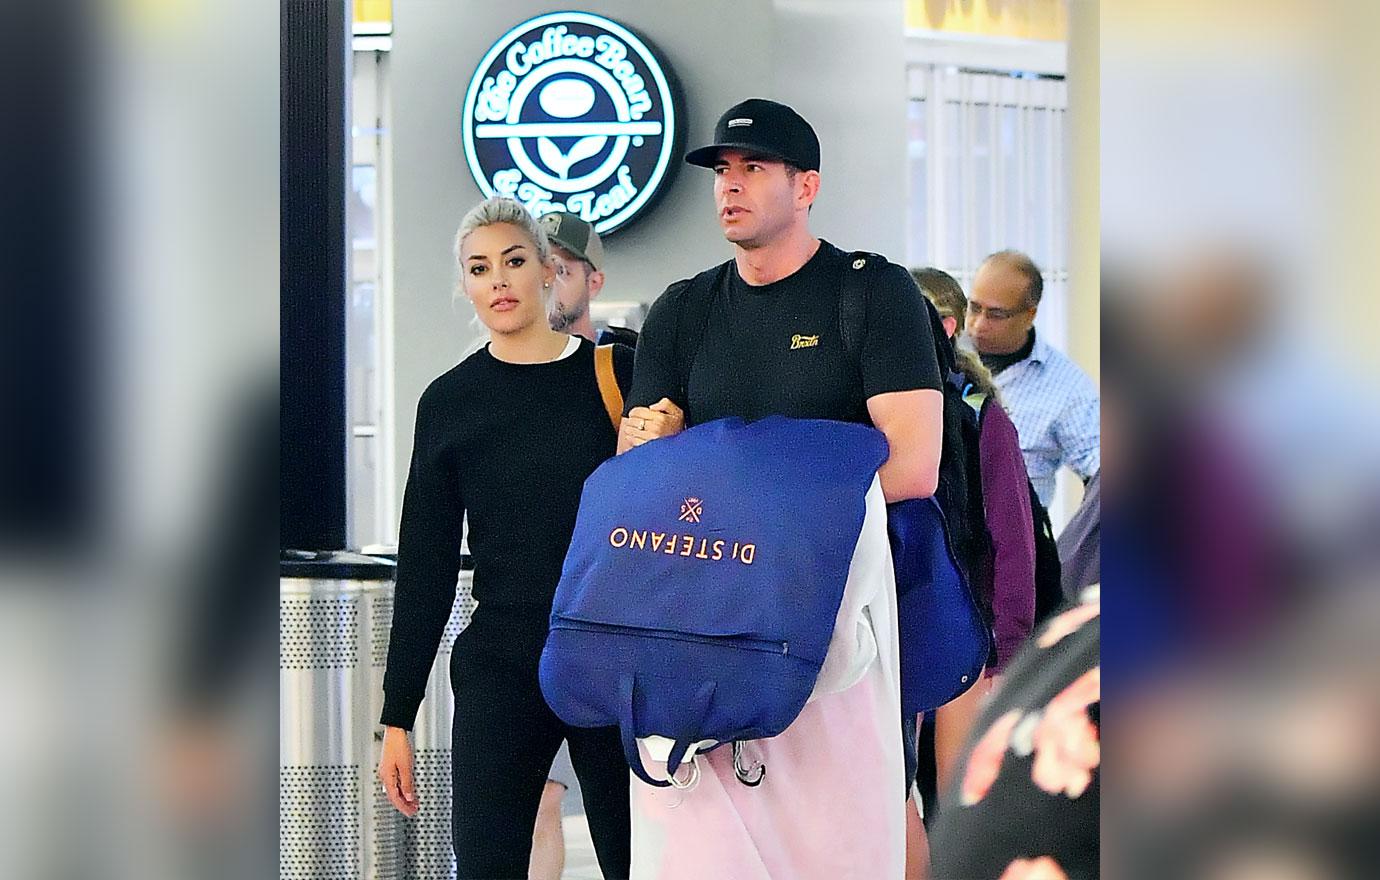 Christina El Moussa LAX Airport March 11, 2021 – Star Style